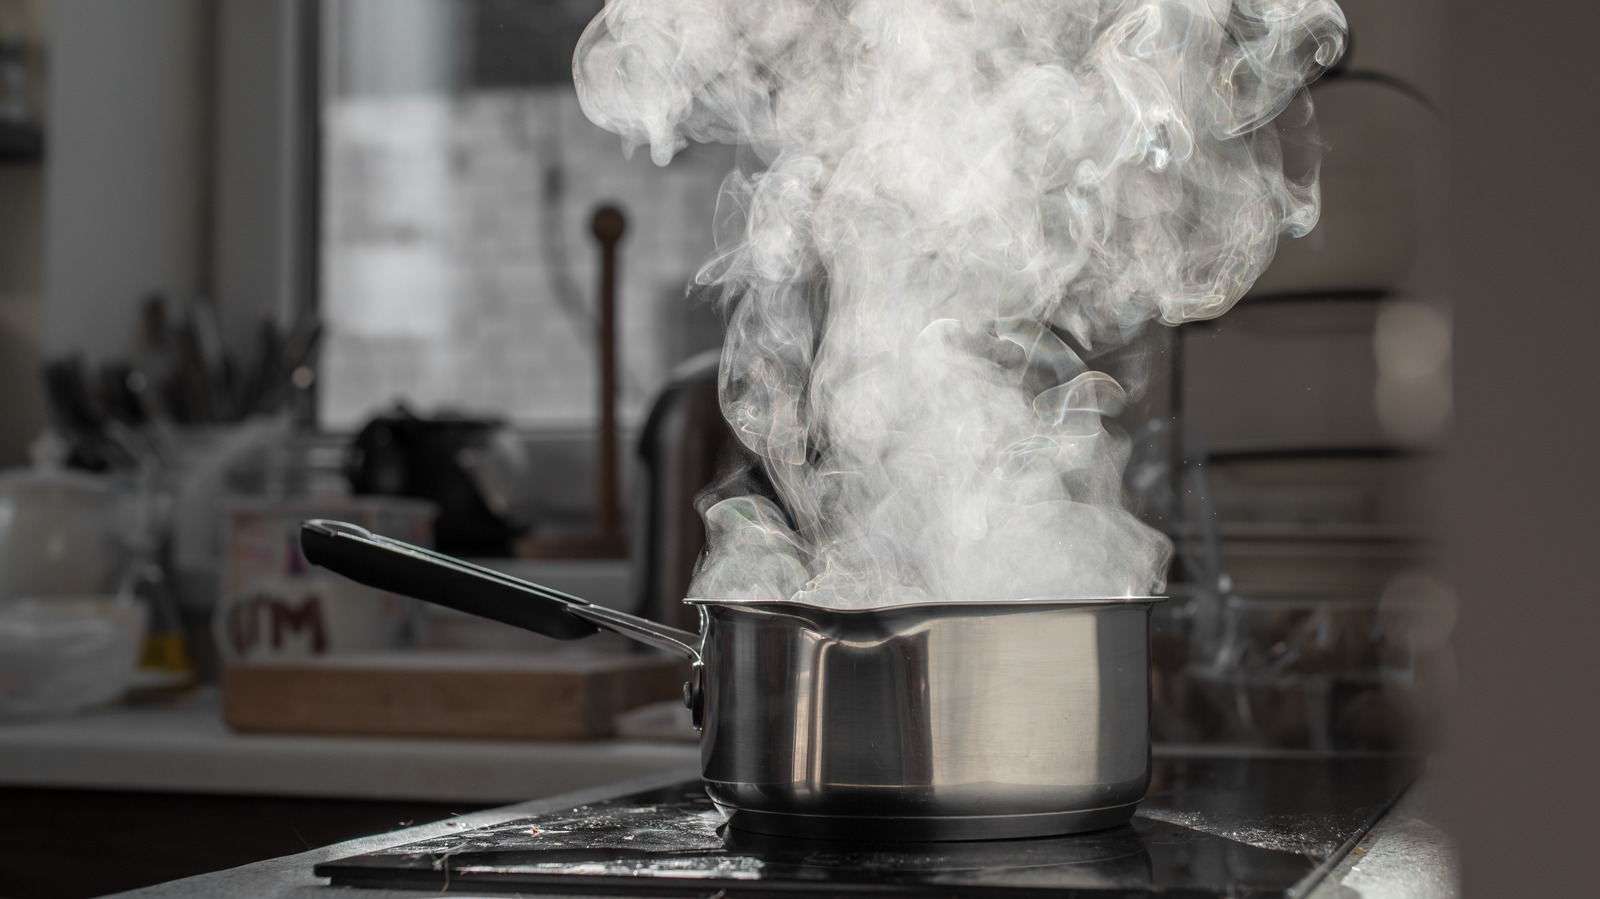 The Simple Spoon Hack To Prevent Water From Boiling Over